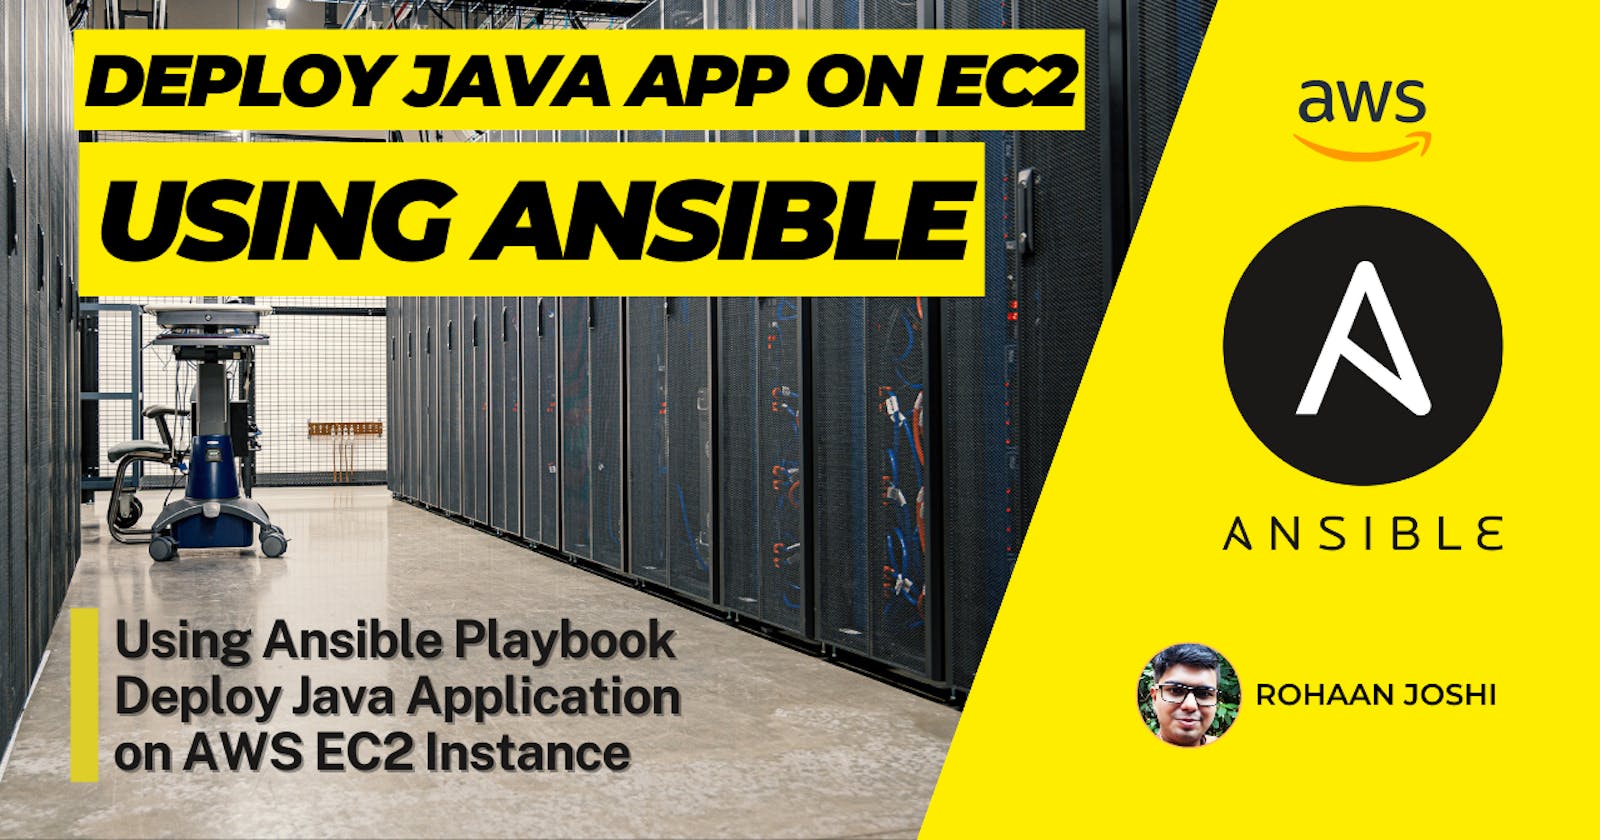 How to Deploy Java Application Using Ansible on AWS EC2 Instnace